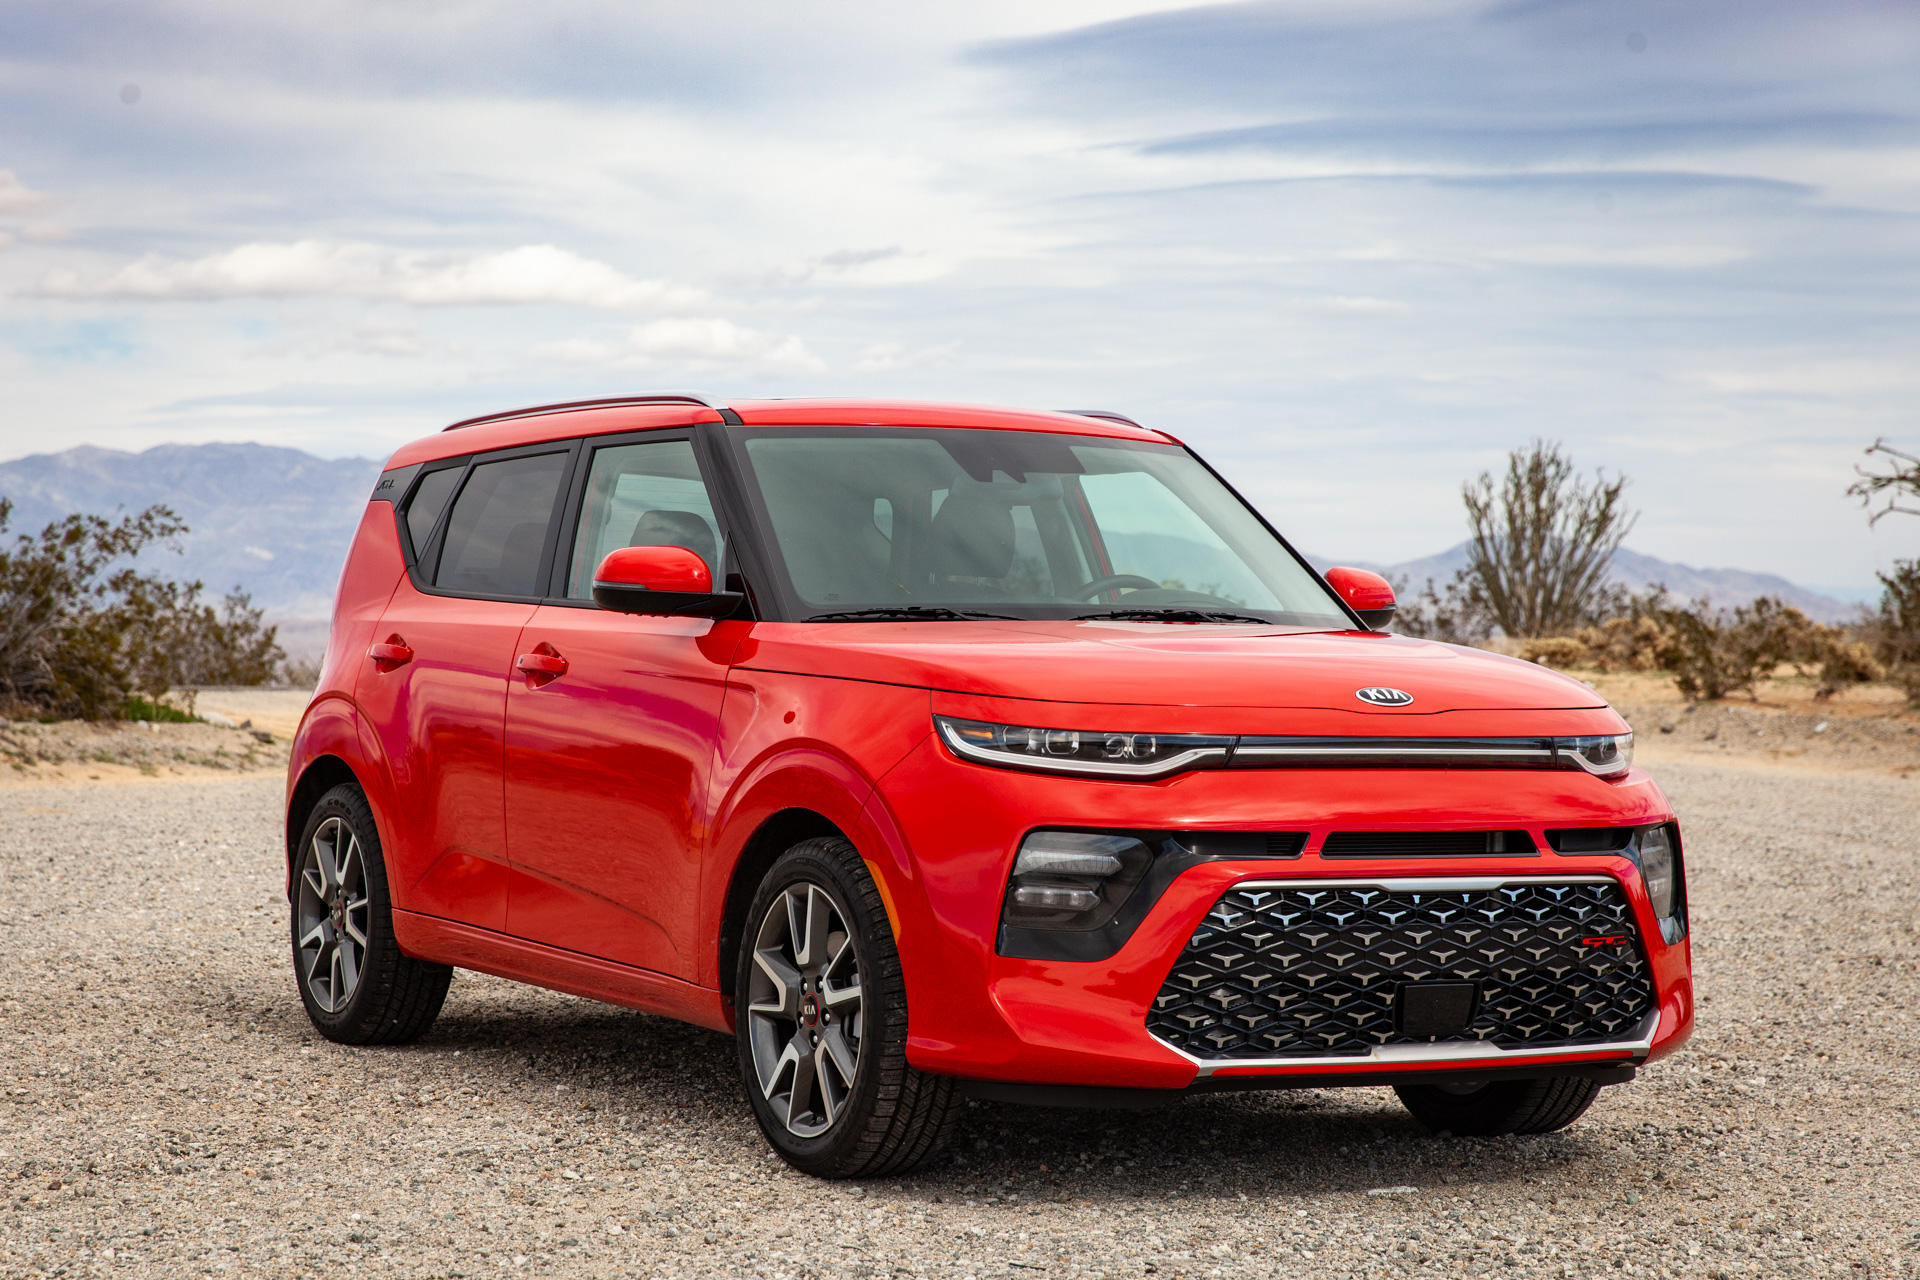 2020 Kia Soul hatchback costs $18,485 to start; perky turbo costs $28,485